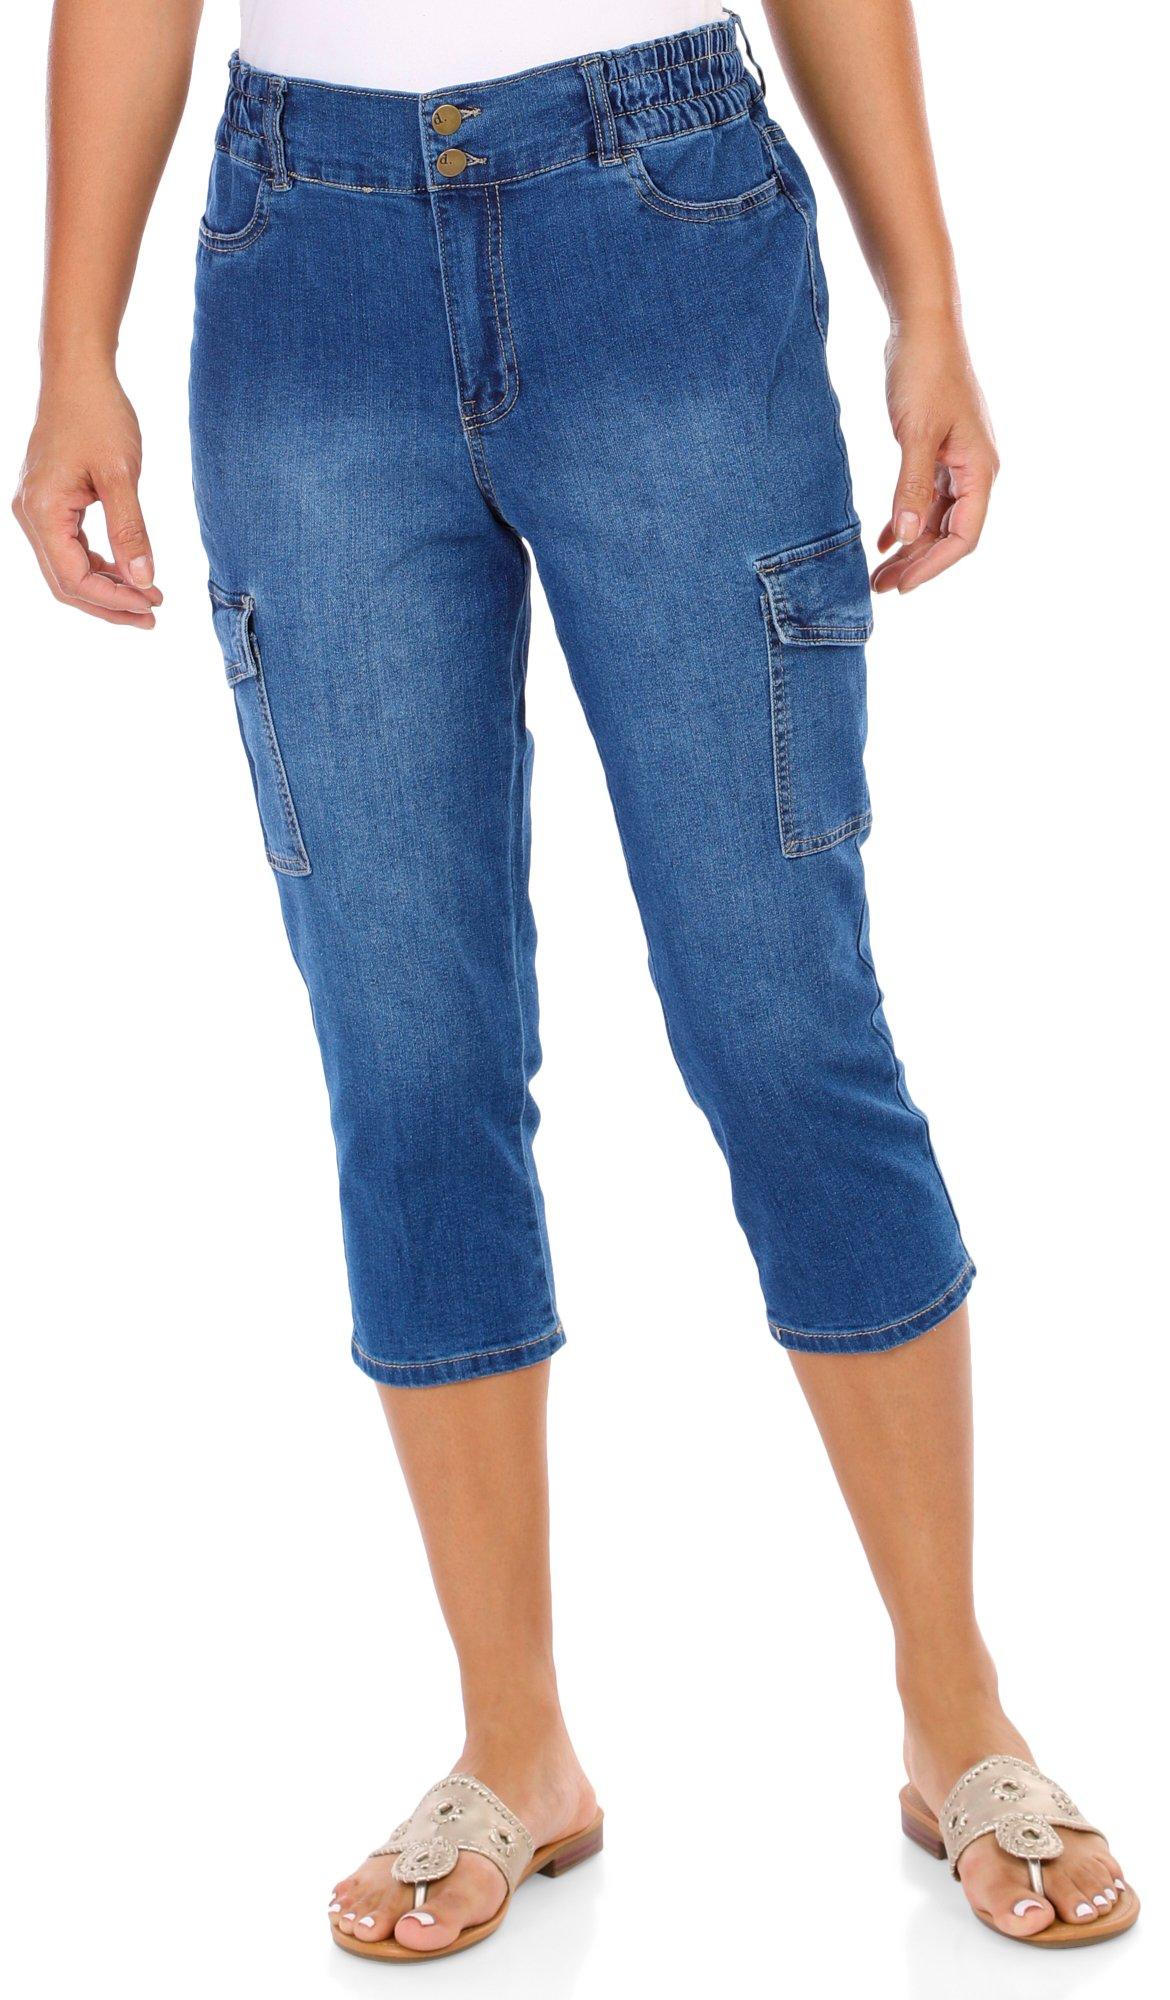 Polyester Pants & Capris for Women: Buy Polyester Pants & Capris for Women  Online at Low Prices on Snapdeal.com